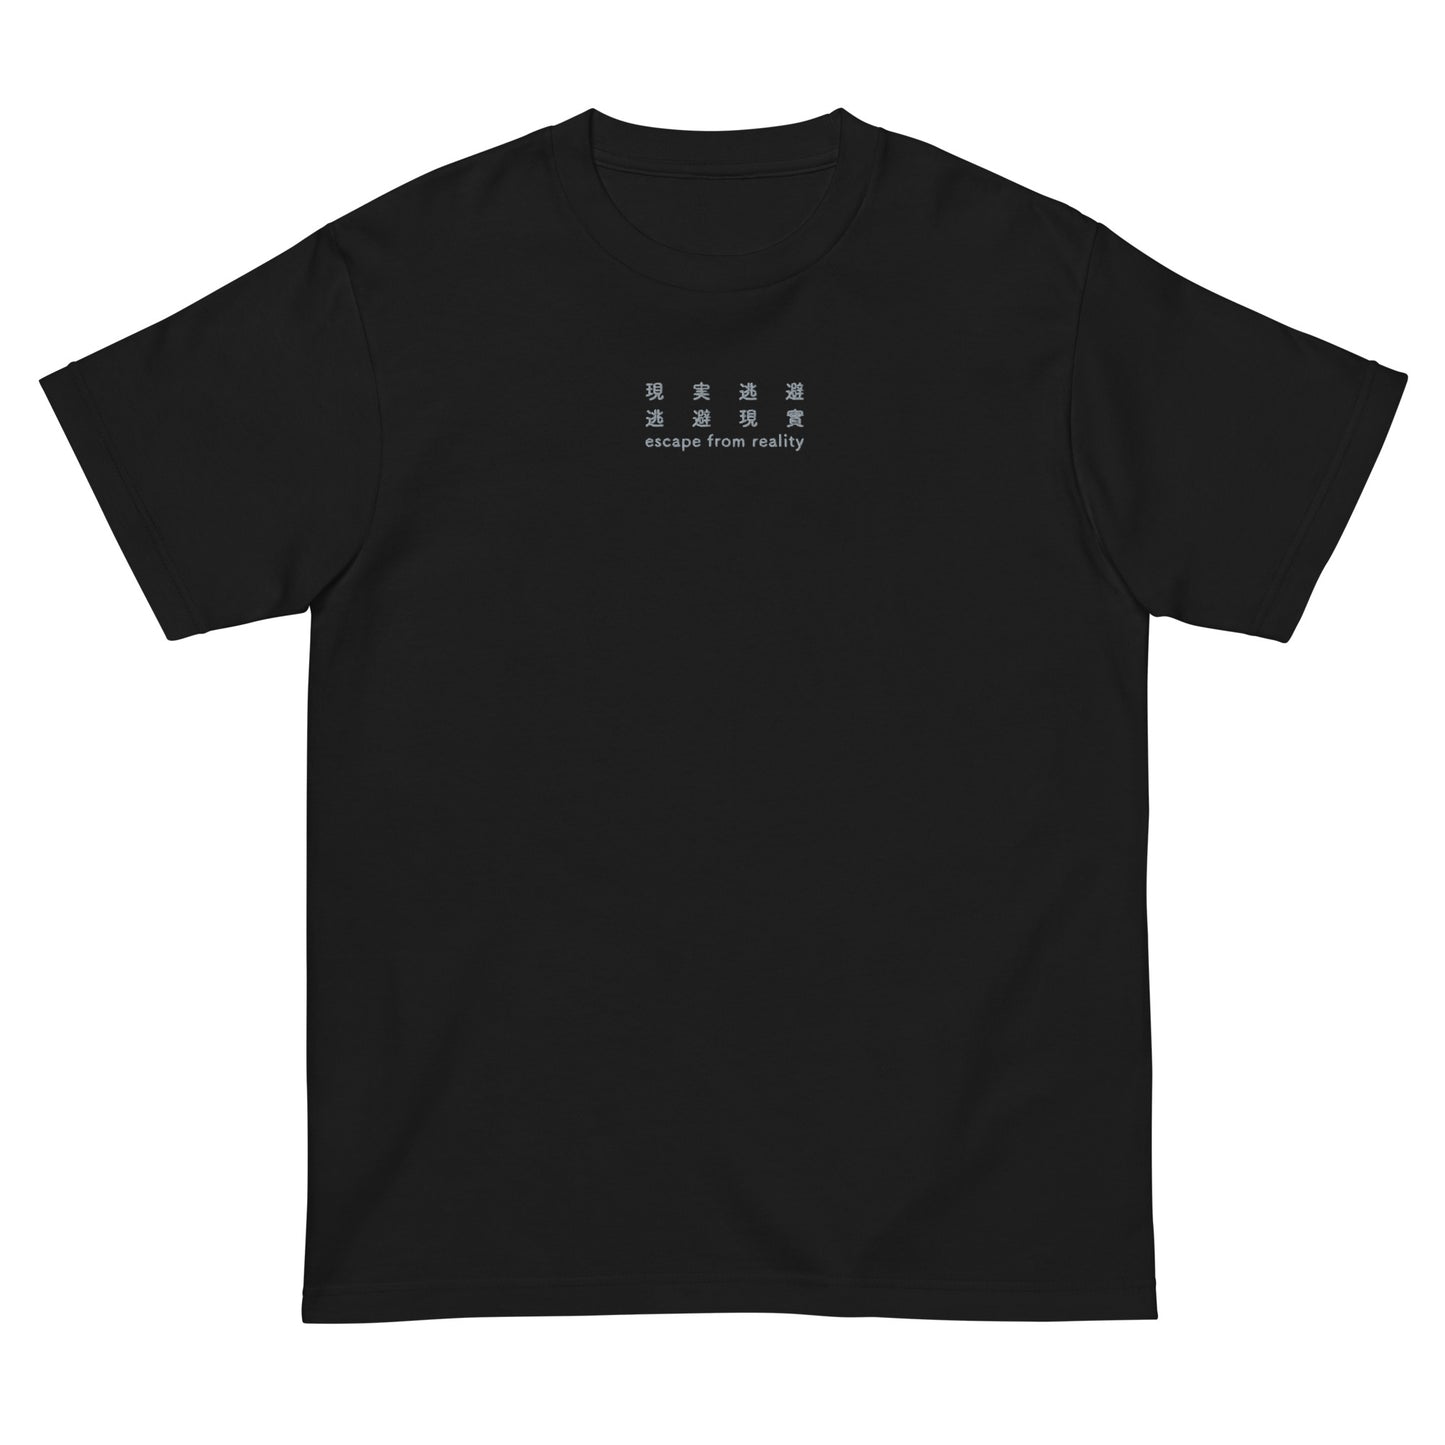 Black High Quality Tee - Front Design with an Light Gray Embroidery "Escape From Reality" in Japanese,Chinese and English